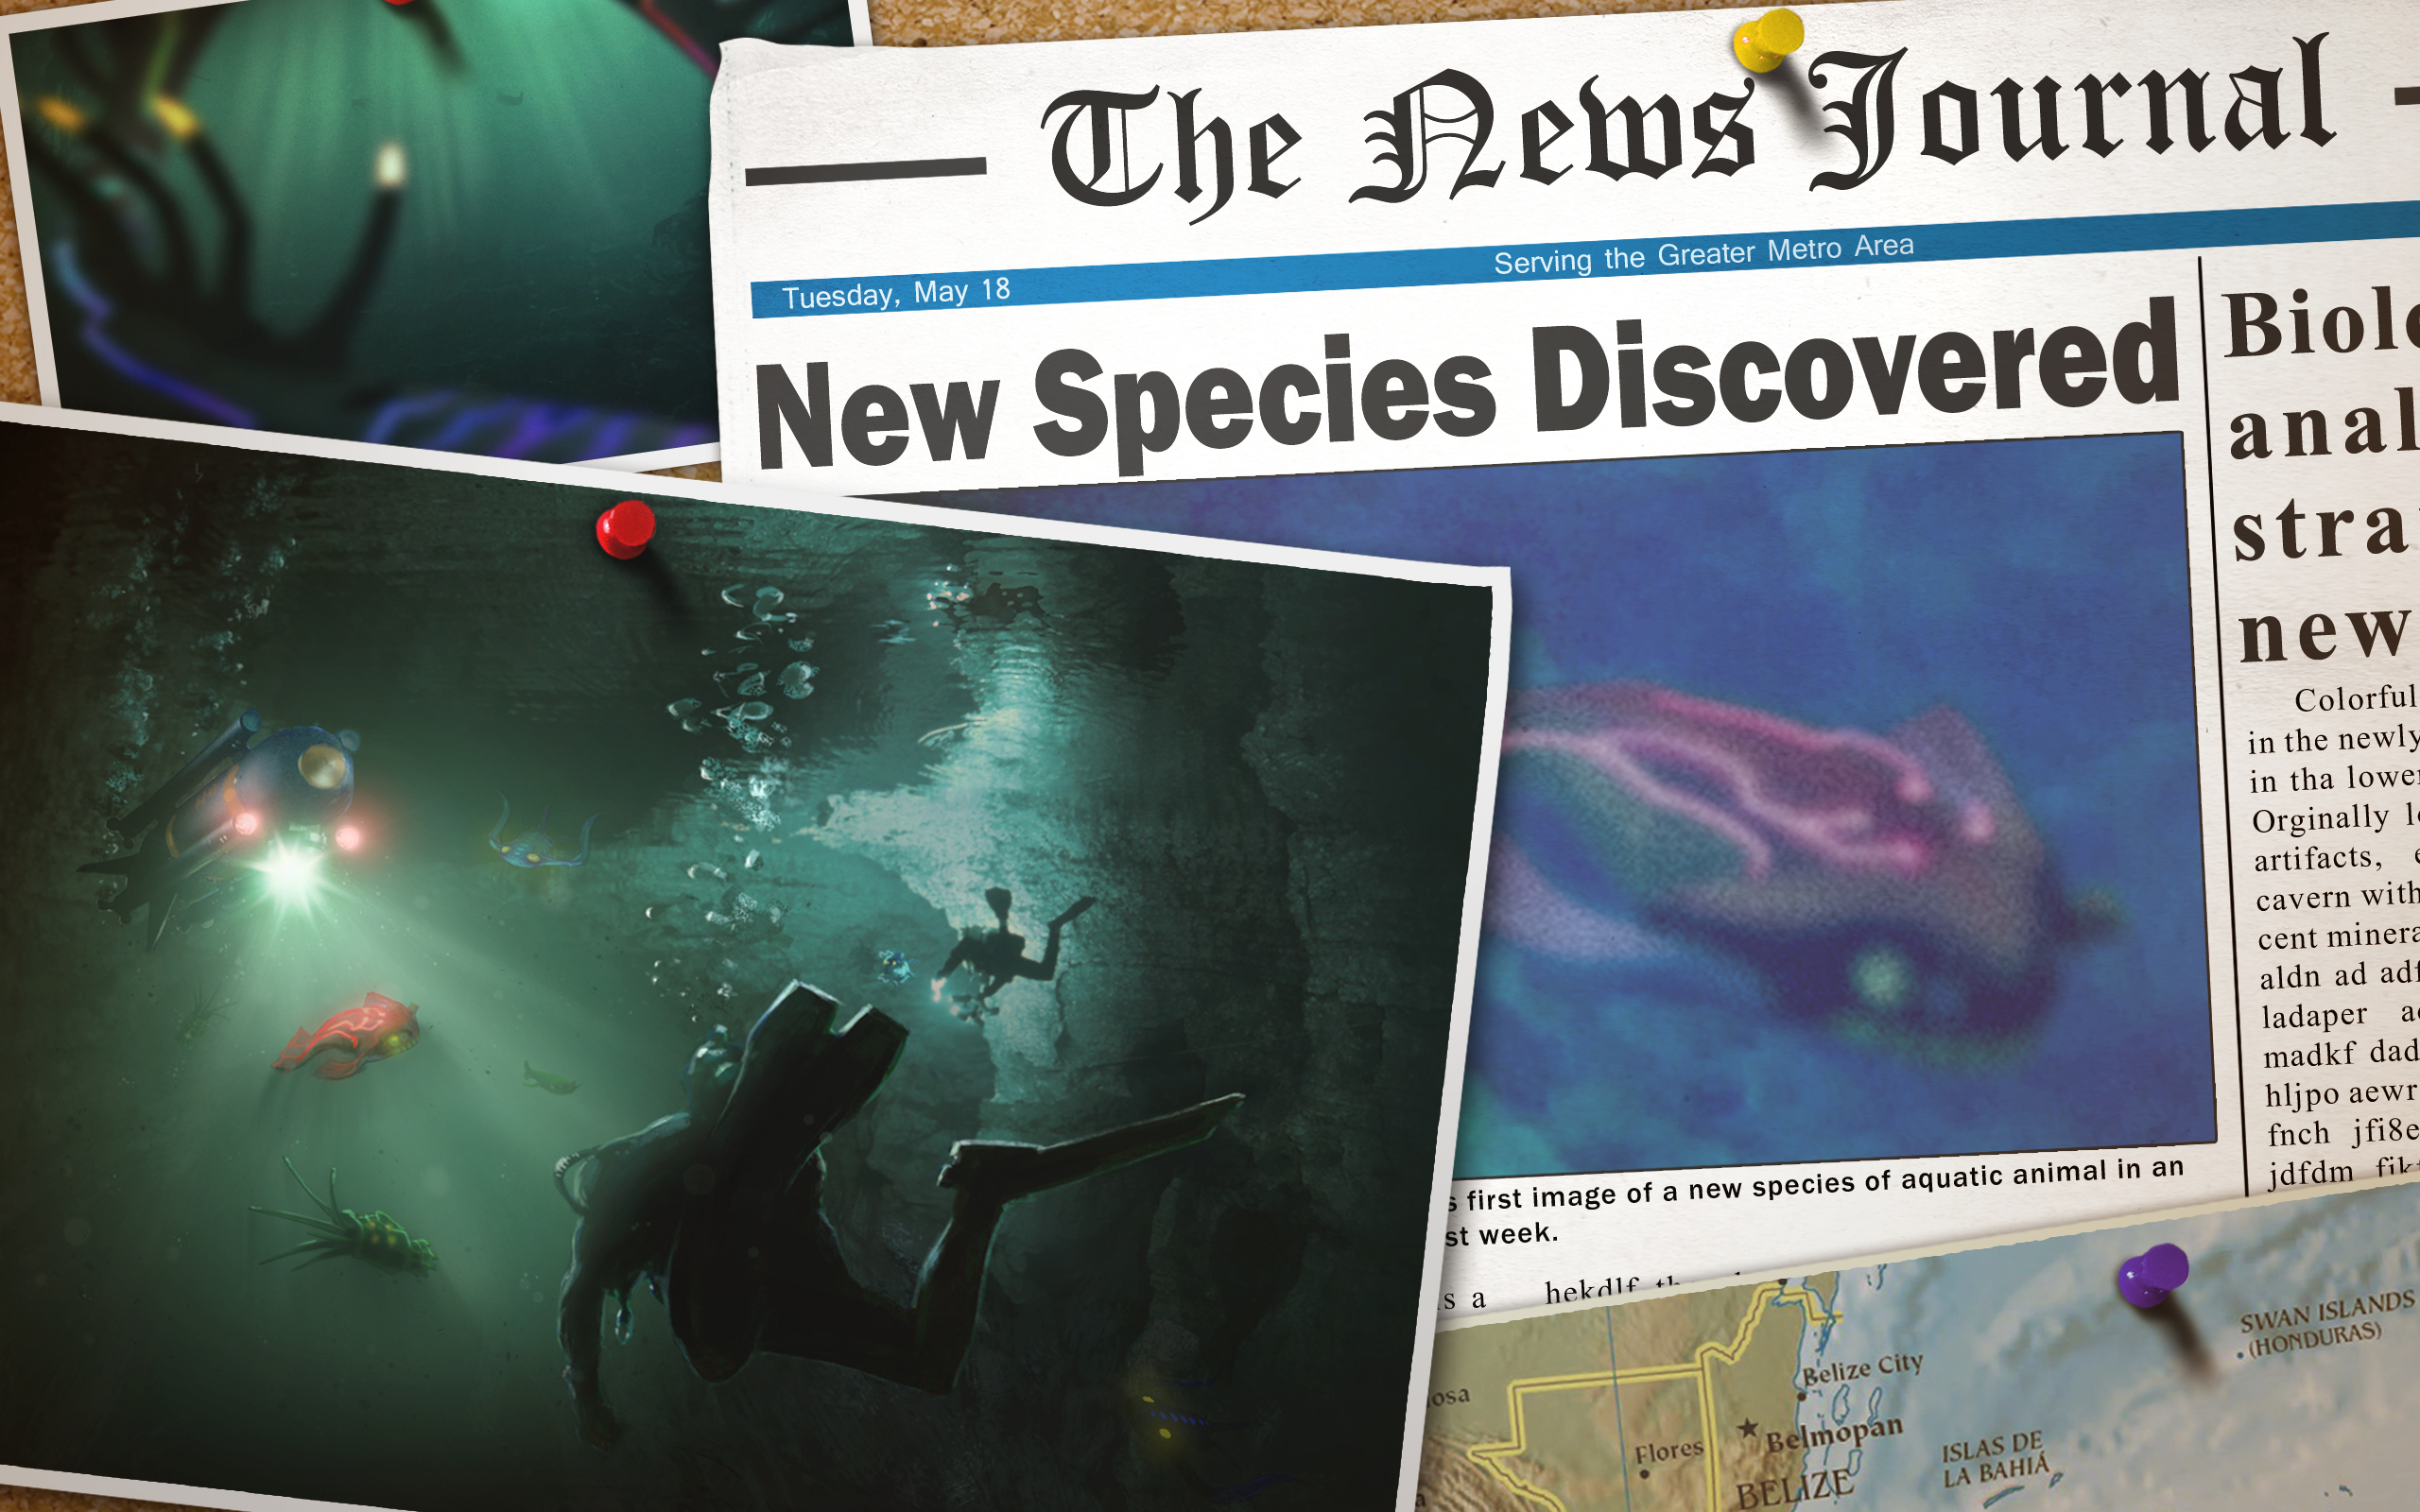 Newspaper headline that reads "New Species Discovered"